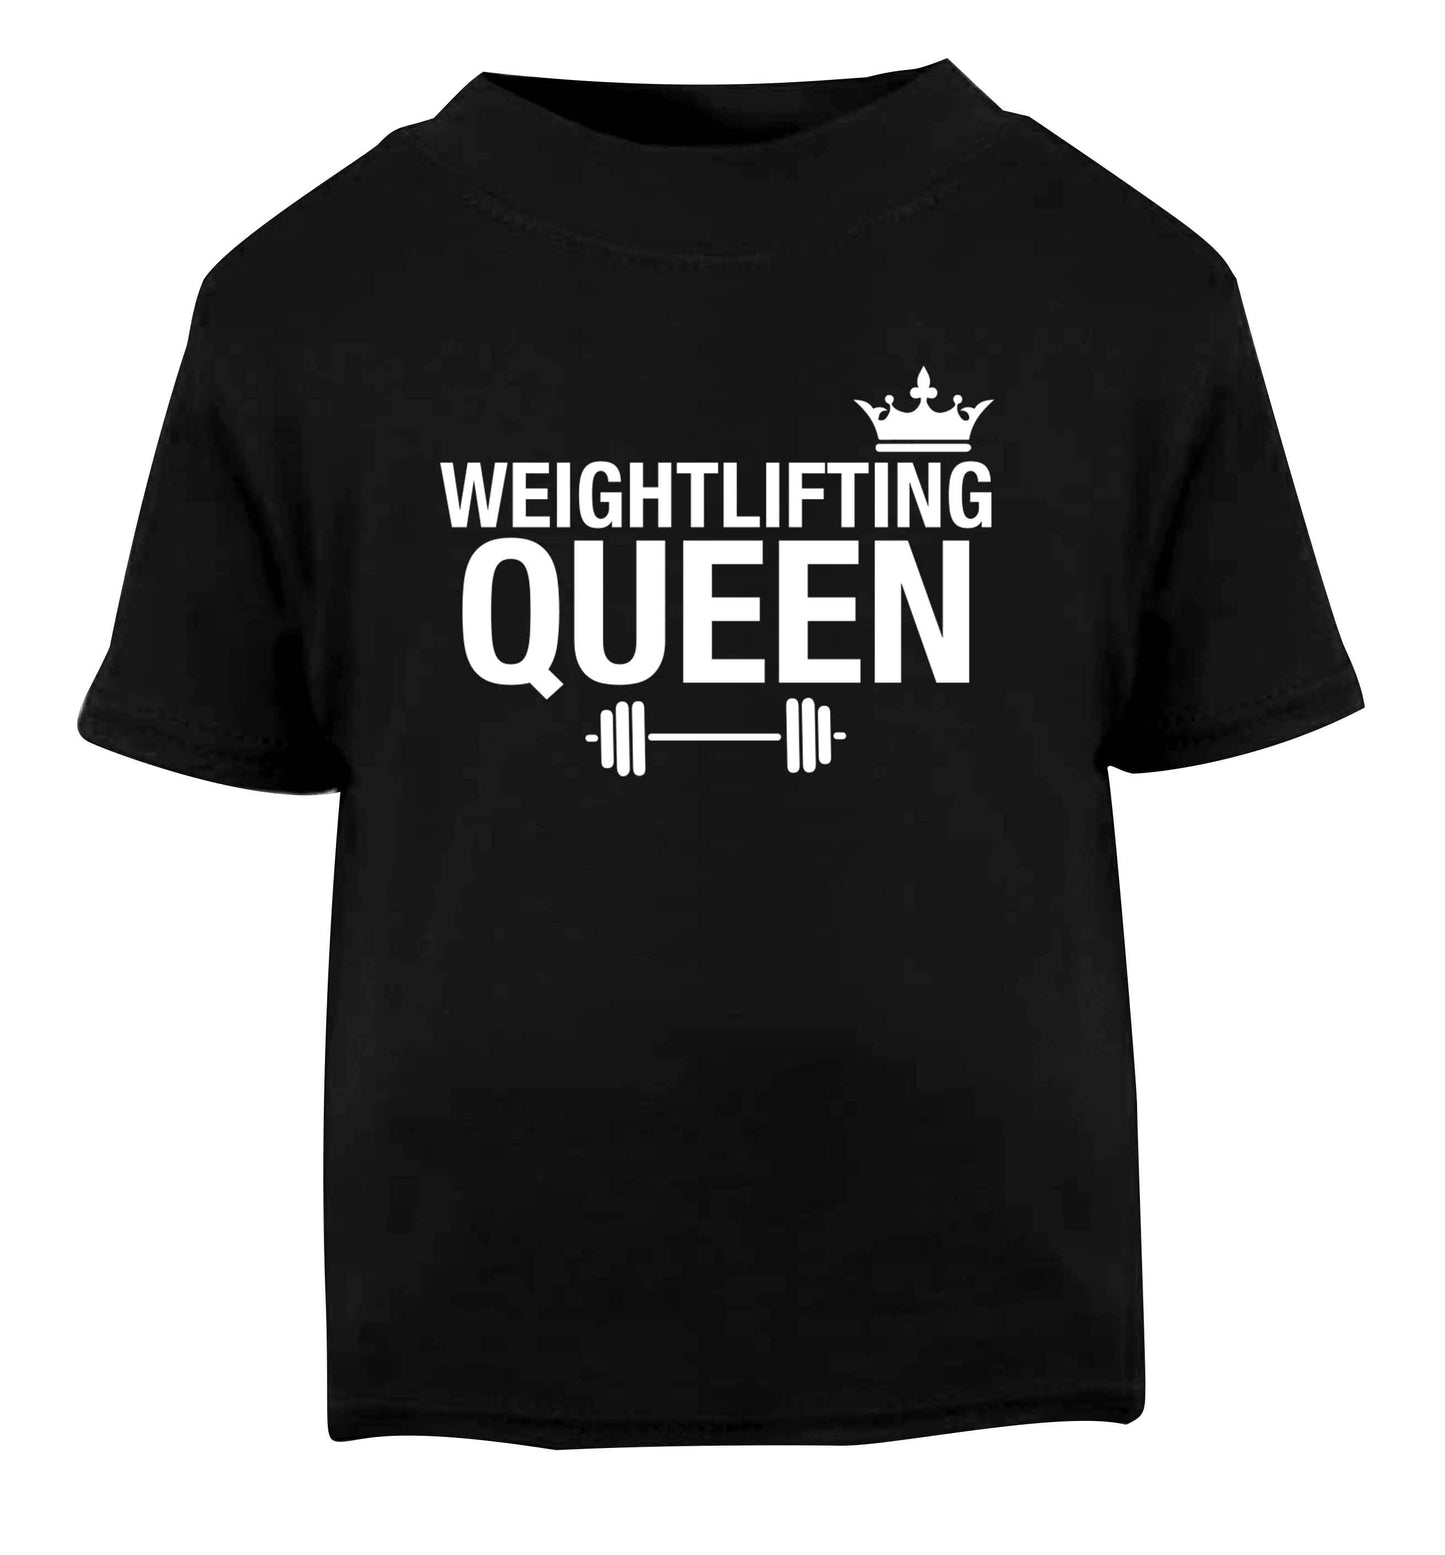 Weightlifting Queen Black Baby Toddler Tshirt 2 years